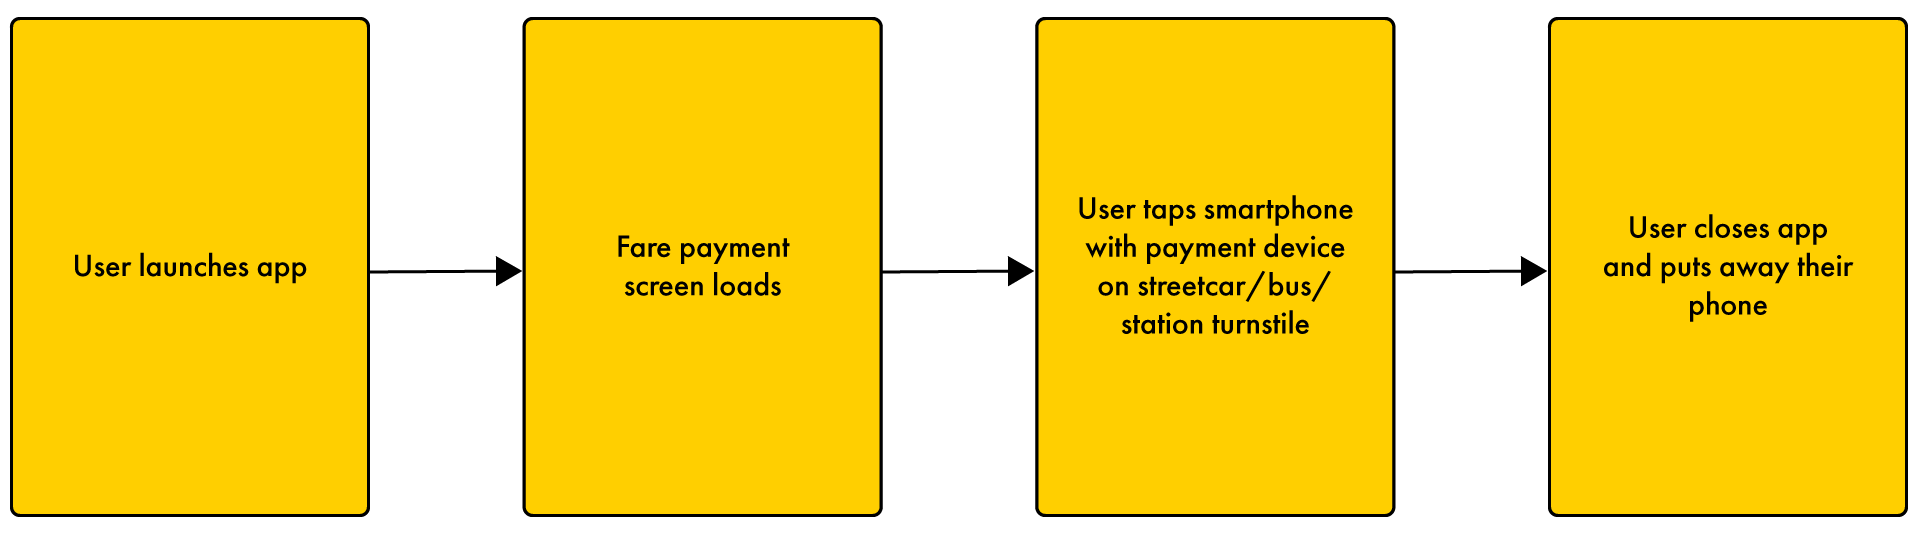 UX User Flow - Fare Payment